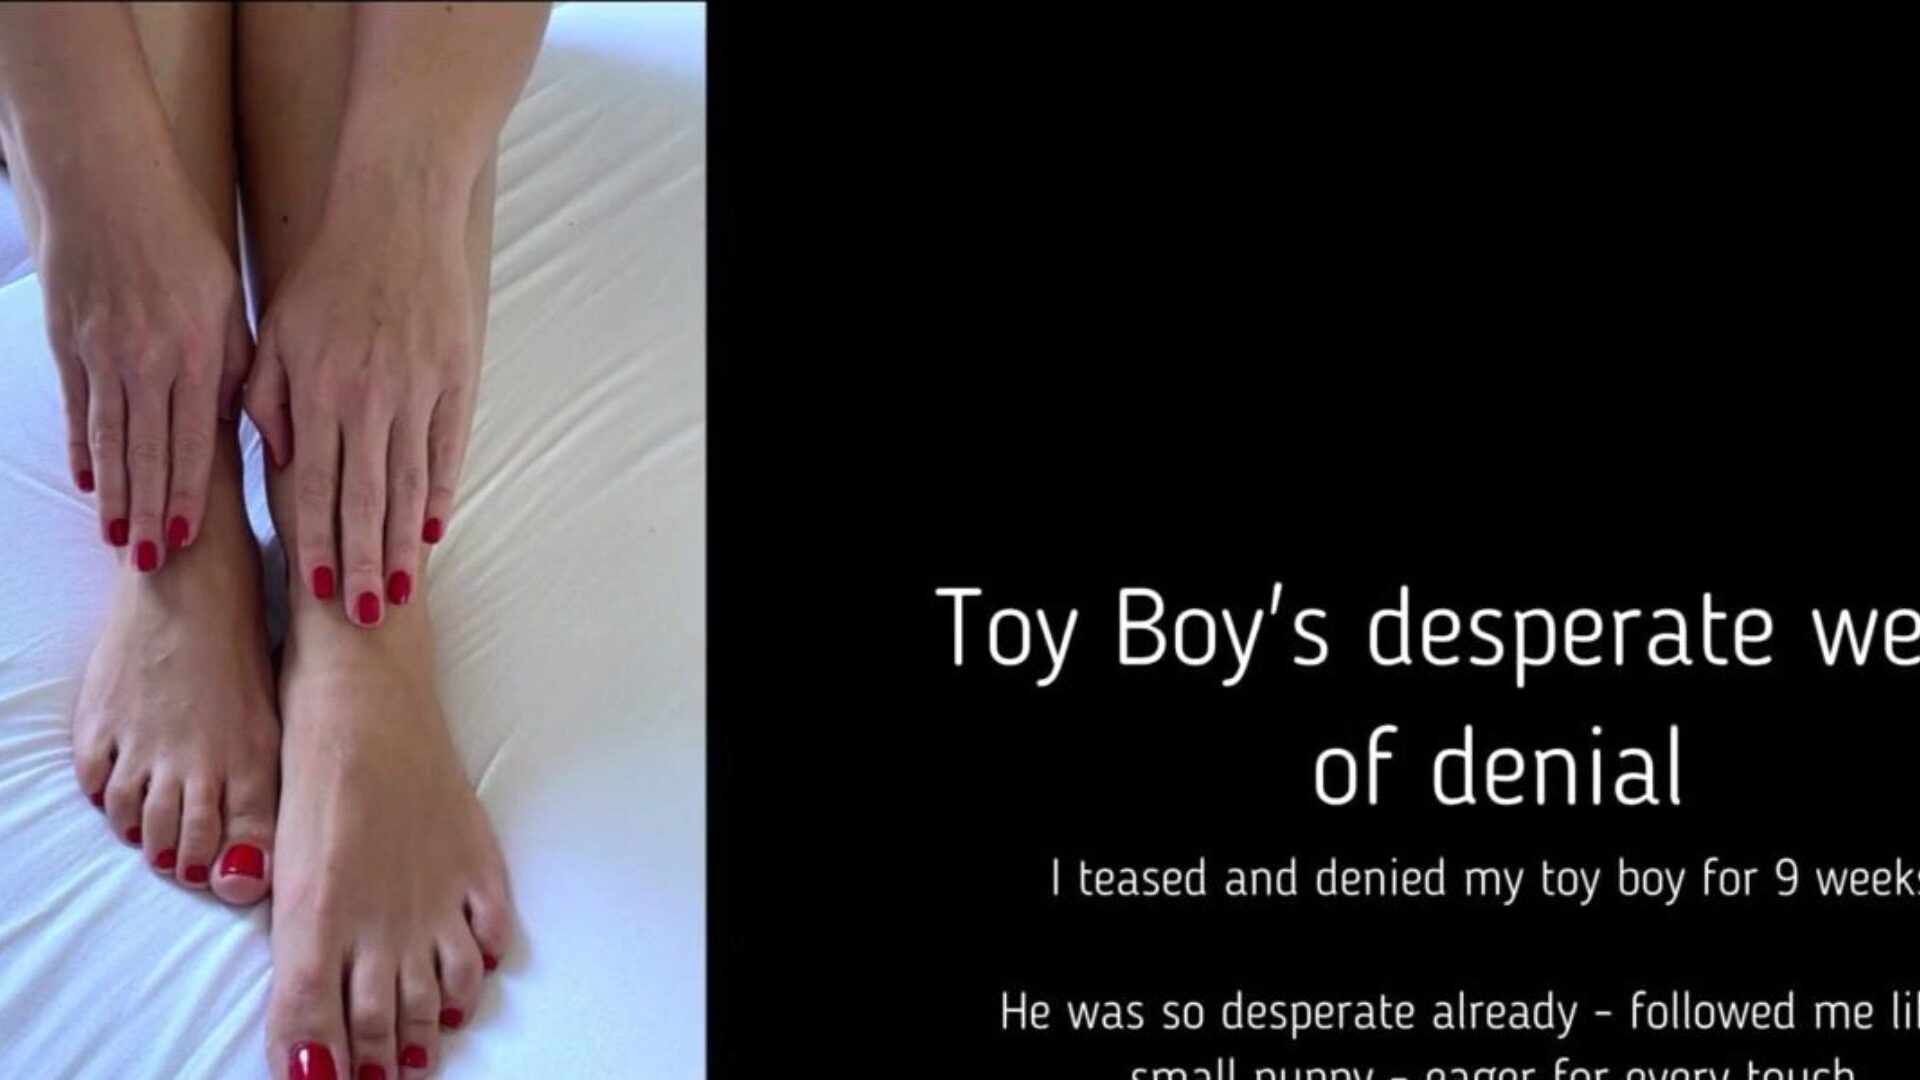 Toy Boy's desperate weeks of denial I've teased and denied my plaything chap for 9 desperate weeks. He followed me like a puppy, crazy to be fondled Finally I decided to unleash some cum - with the least orgasmic delectation possible. Loved it!